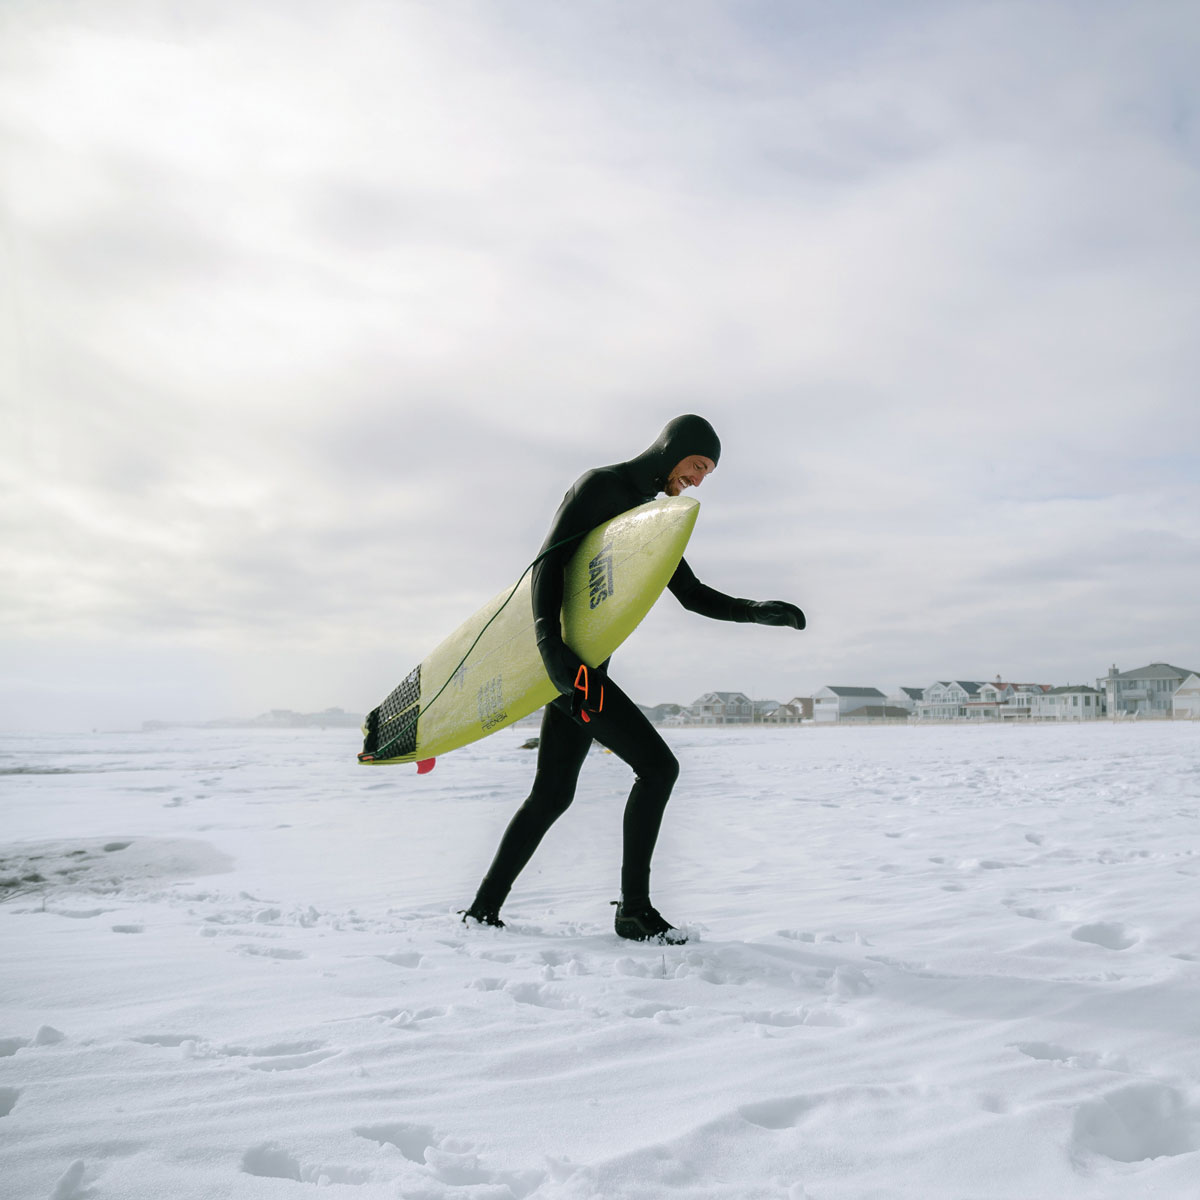 Surfer holding surfboard in snow